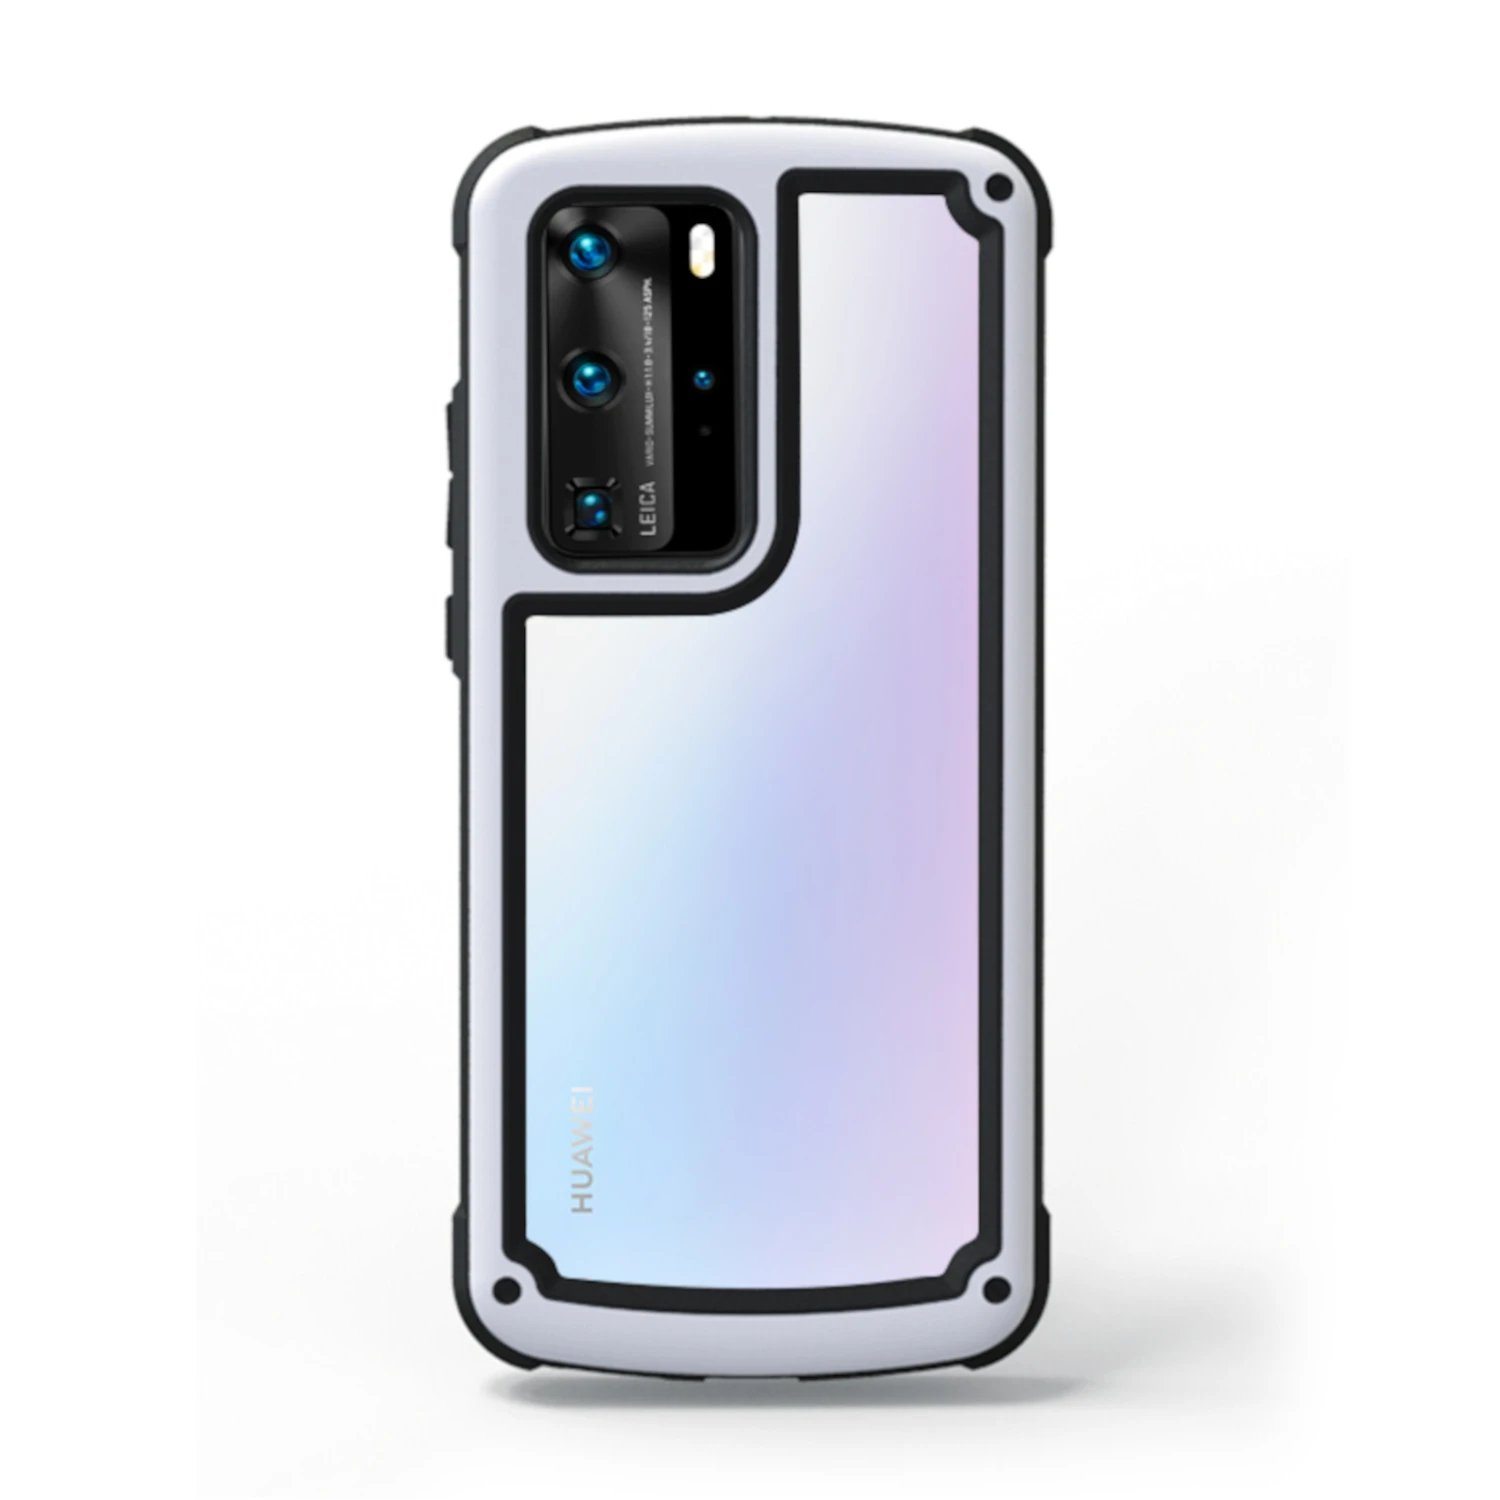 ROOT CO. Gravity Shock Resist Case for Huawei P40, Matte White Huawei P40 ROOT CO. 